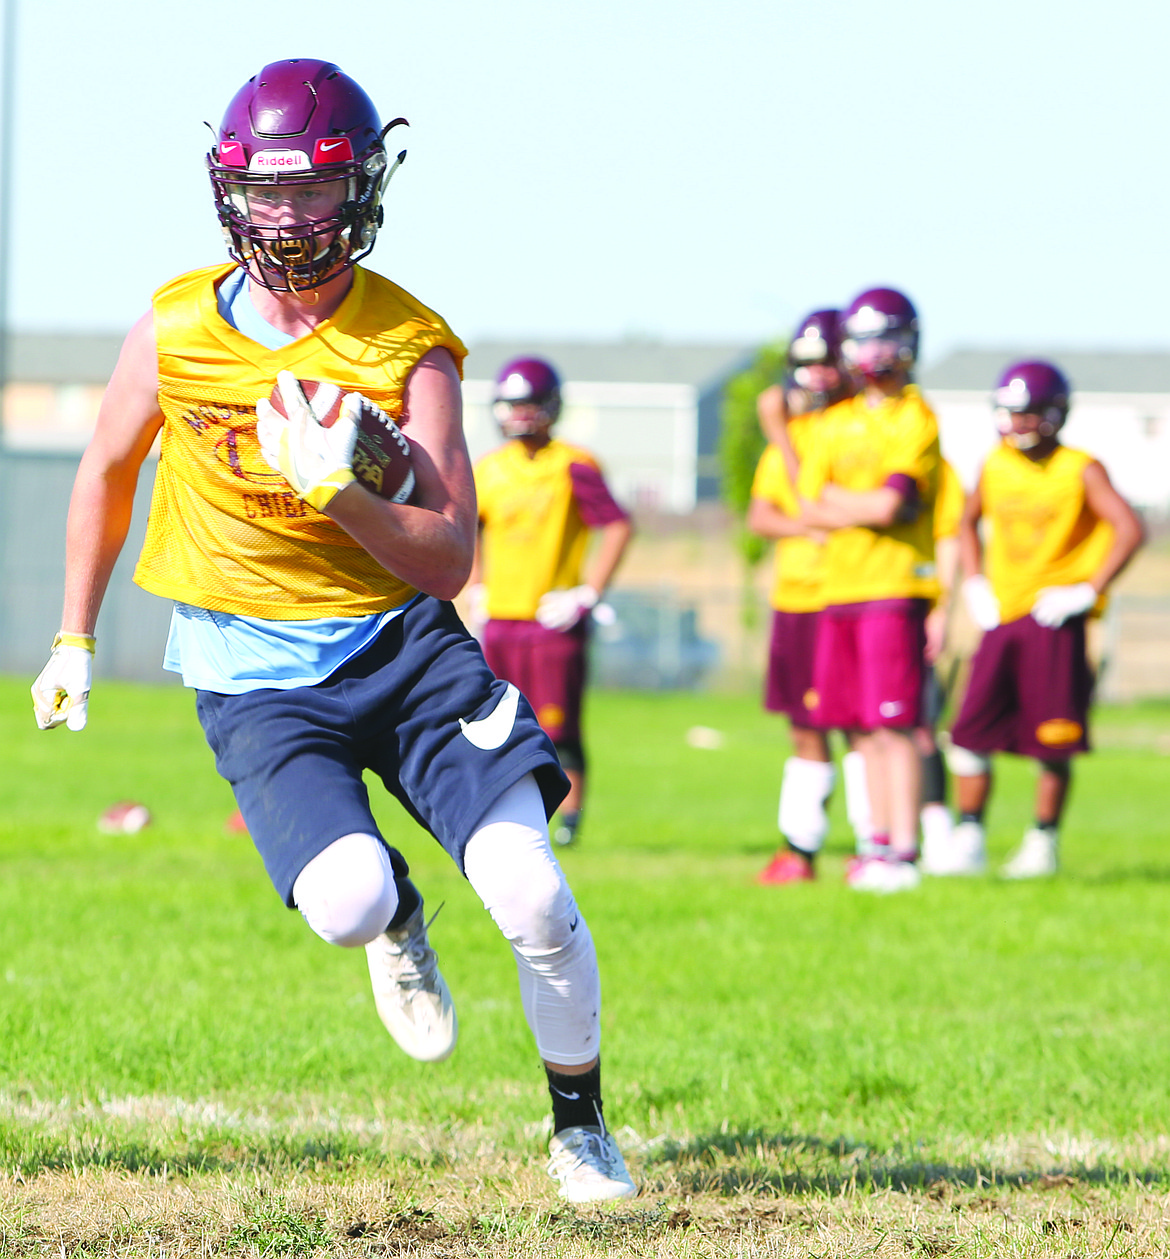 Connor Vanderweyst/Columbia Basin Herald
Moses Lake's Dalenh Anderson carries the ball during practice.